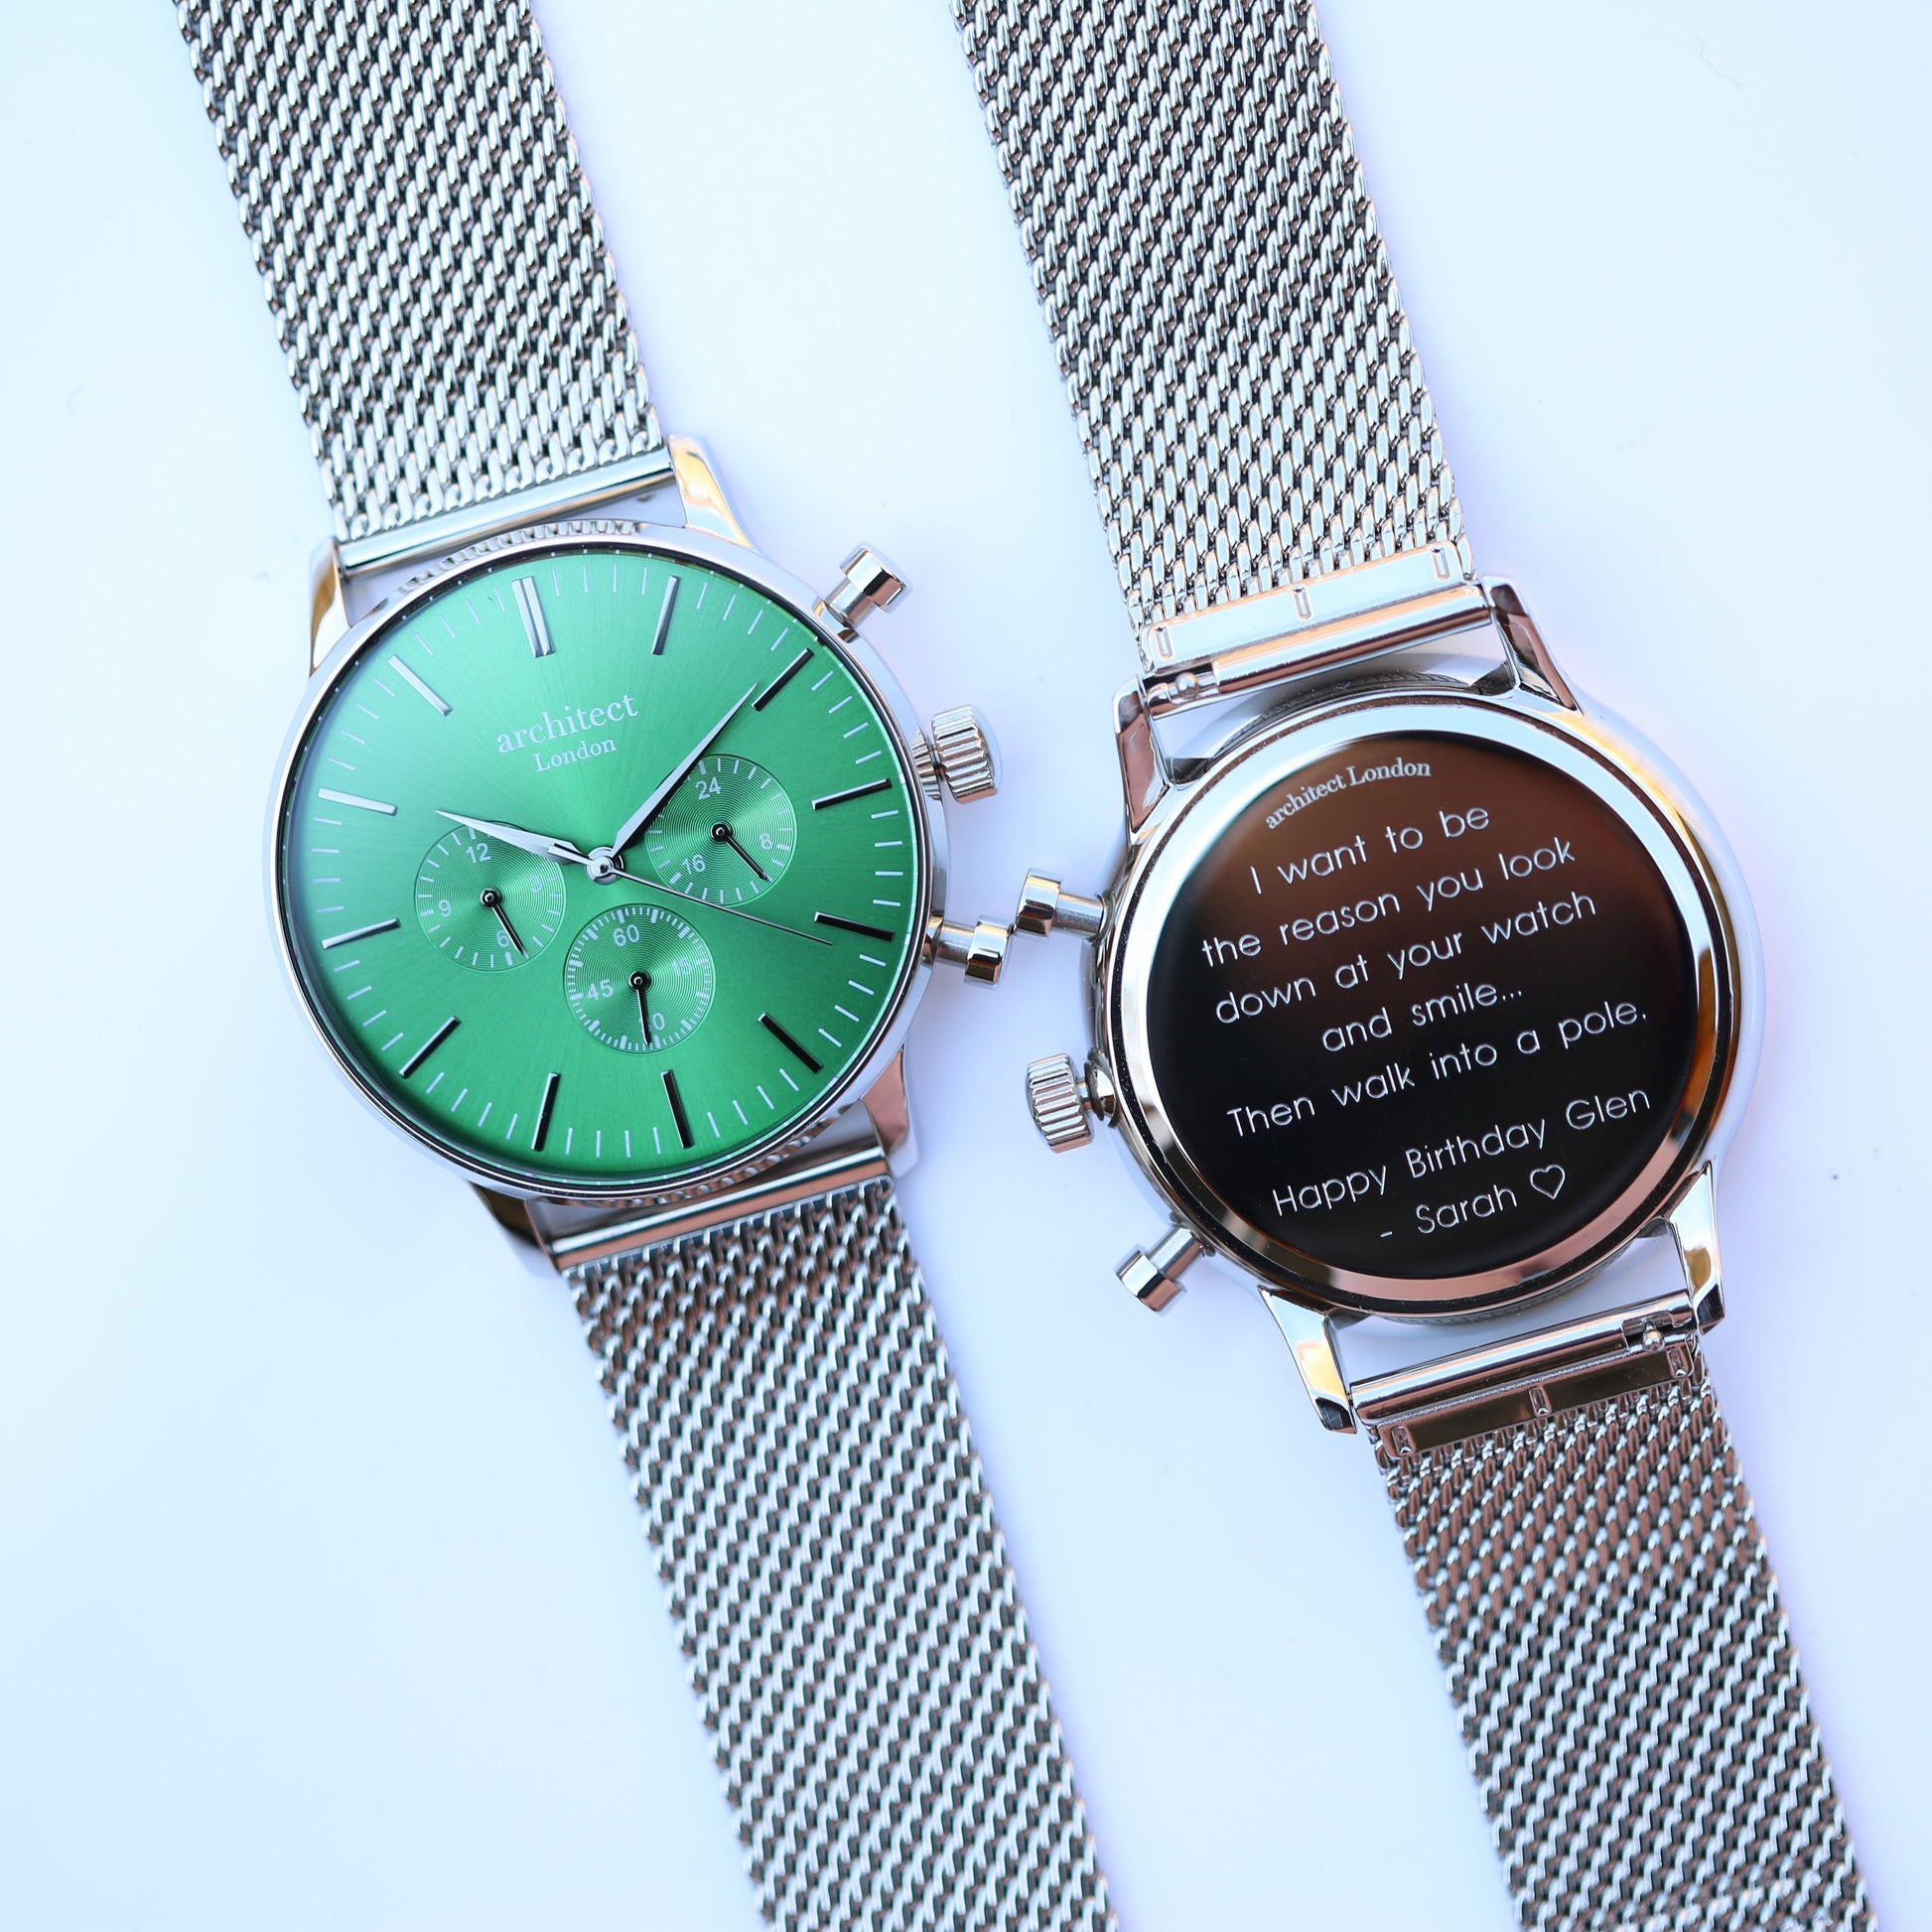 Personalized Men's Watches - Men's Architect Engraved Watch In Envy Green & Silver 